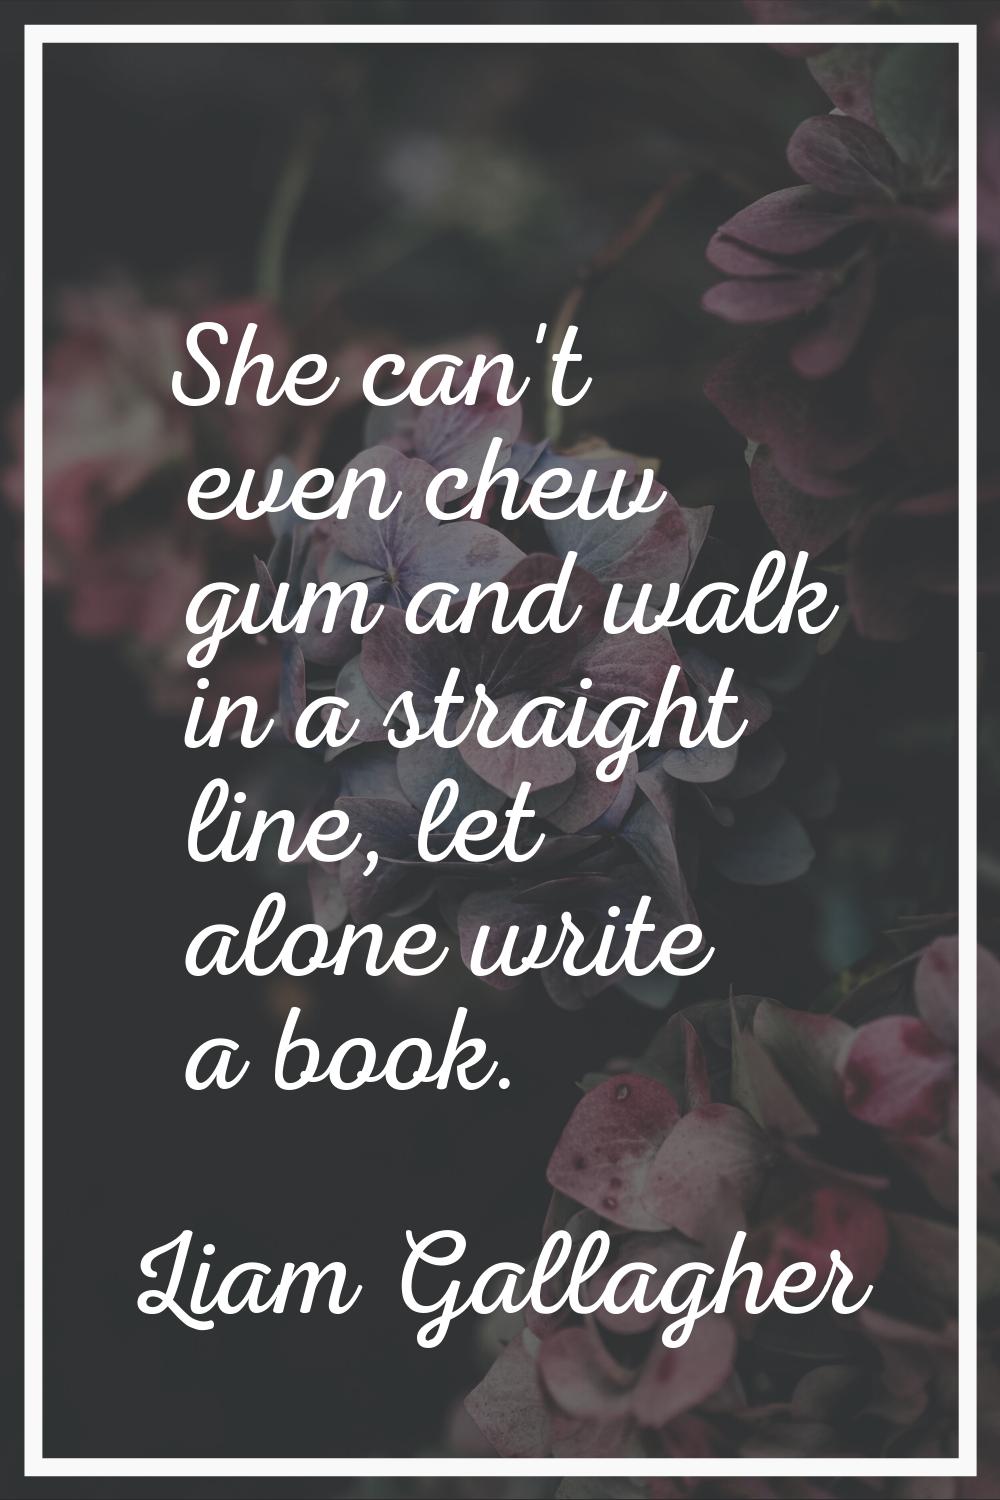 She can't even chew gum and walk in a straight line, let alone write a book.